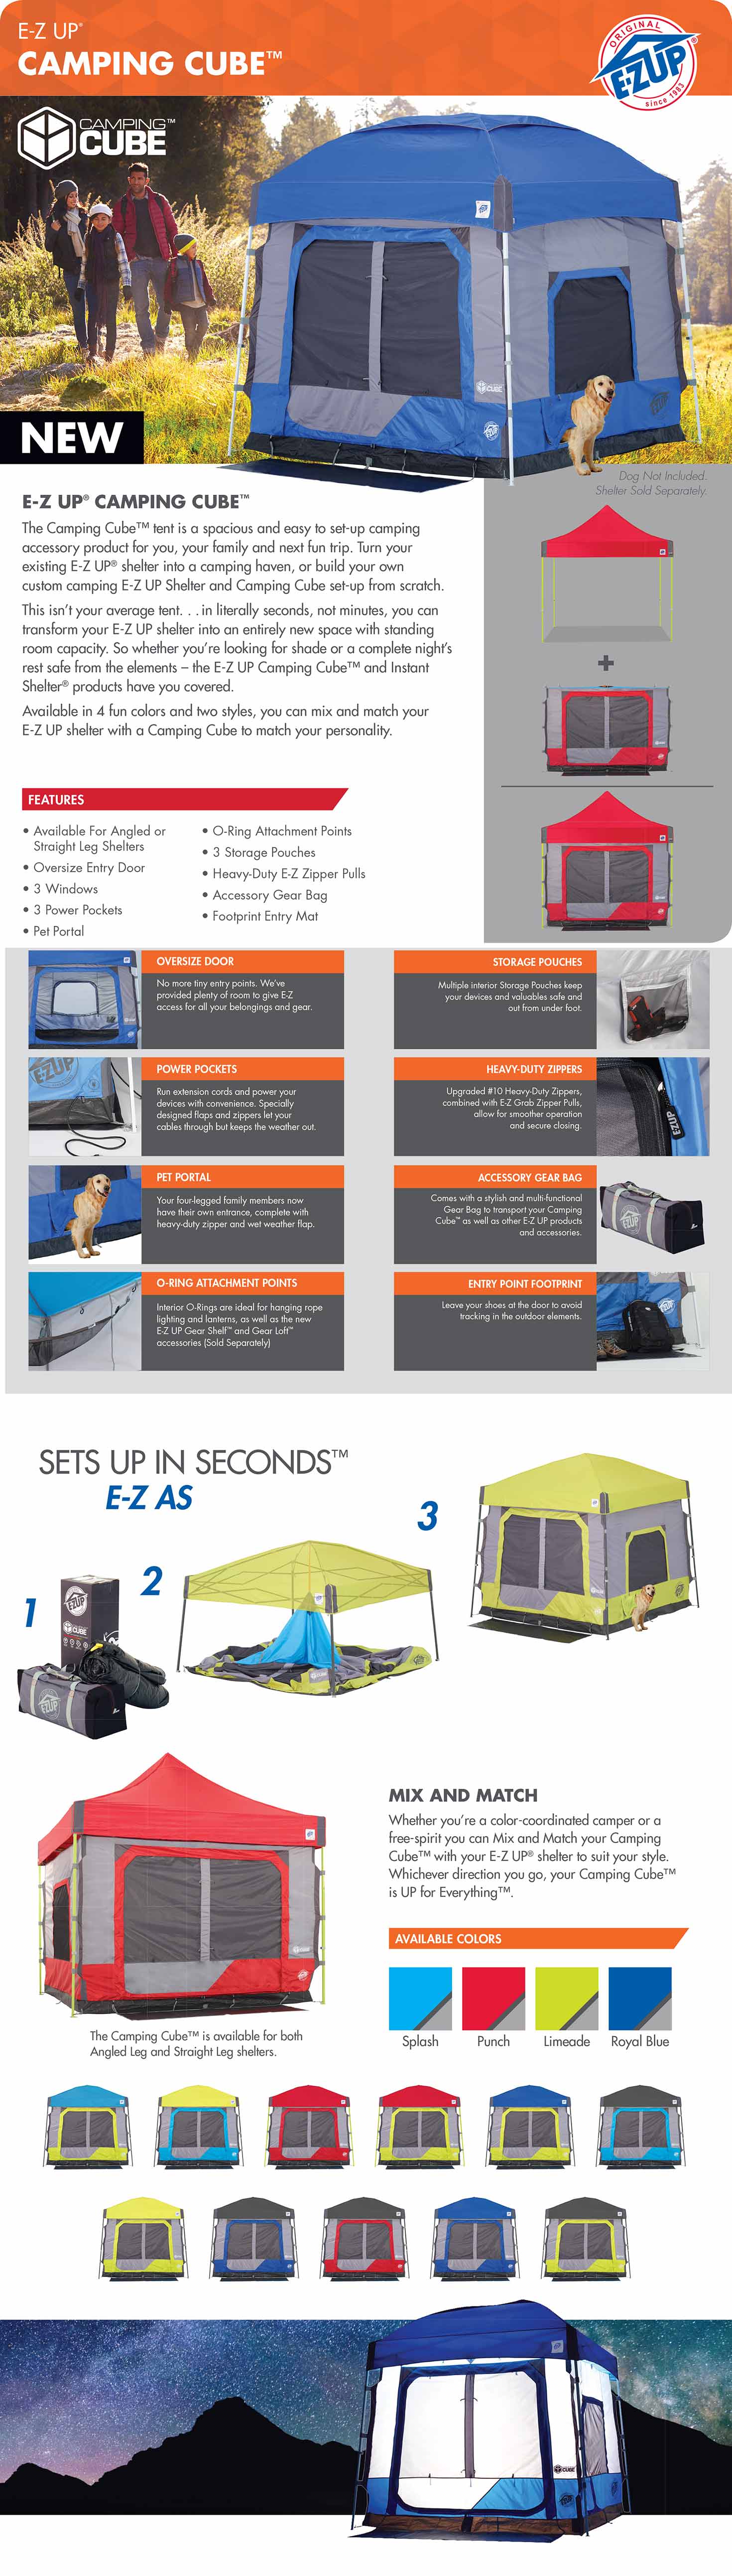 E-Z UP 10'x10' Camping Cube 6.4 